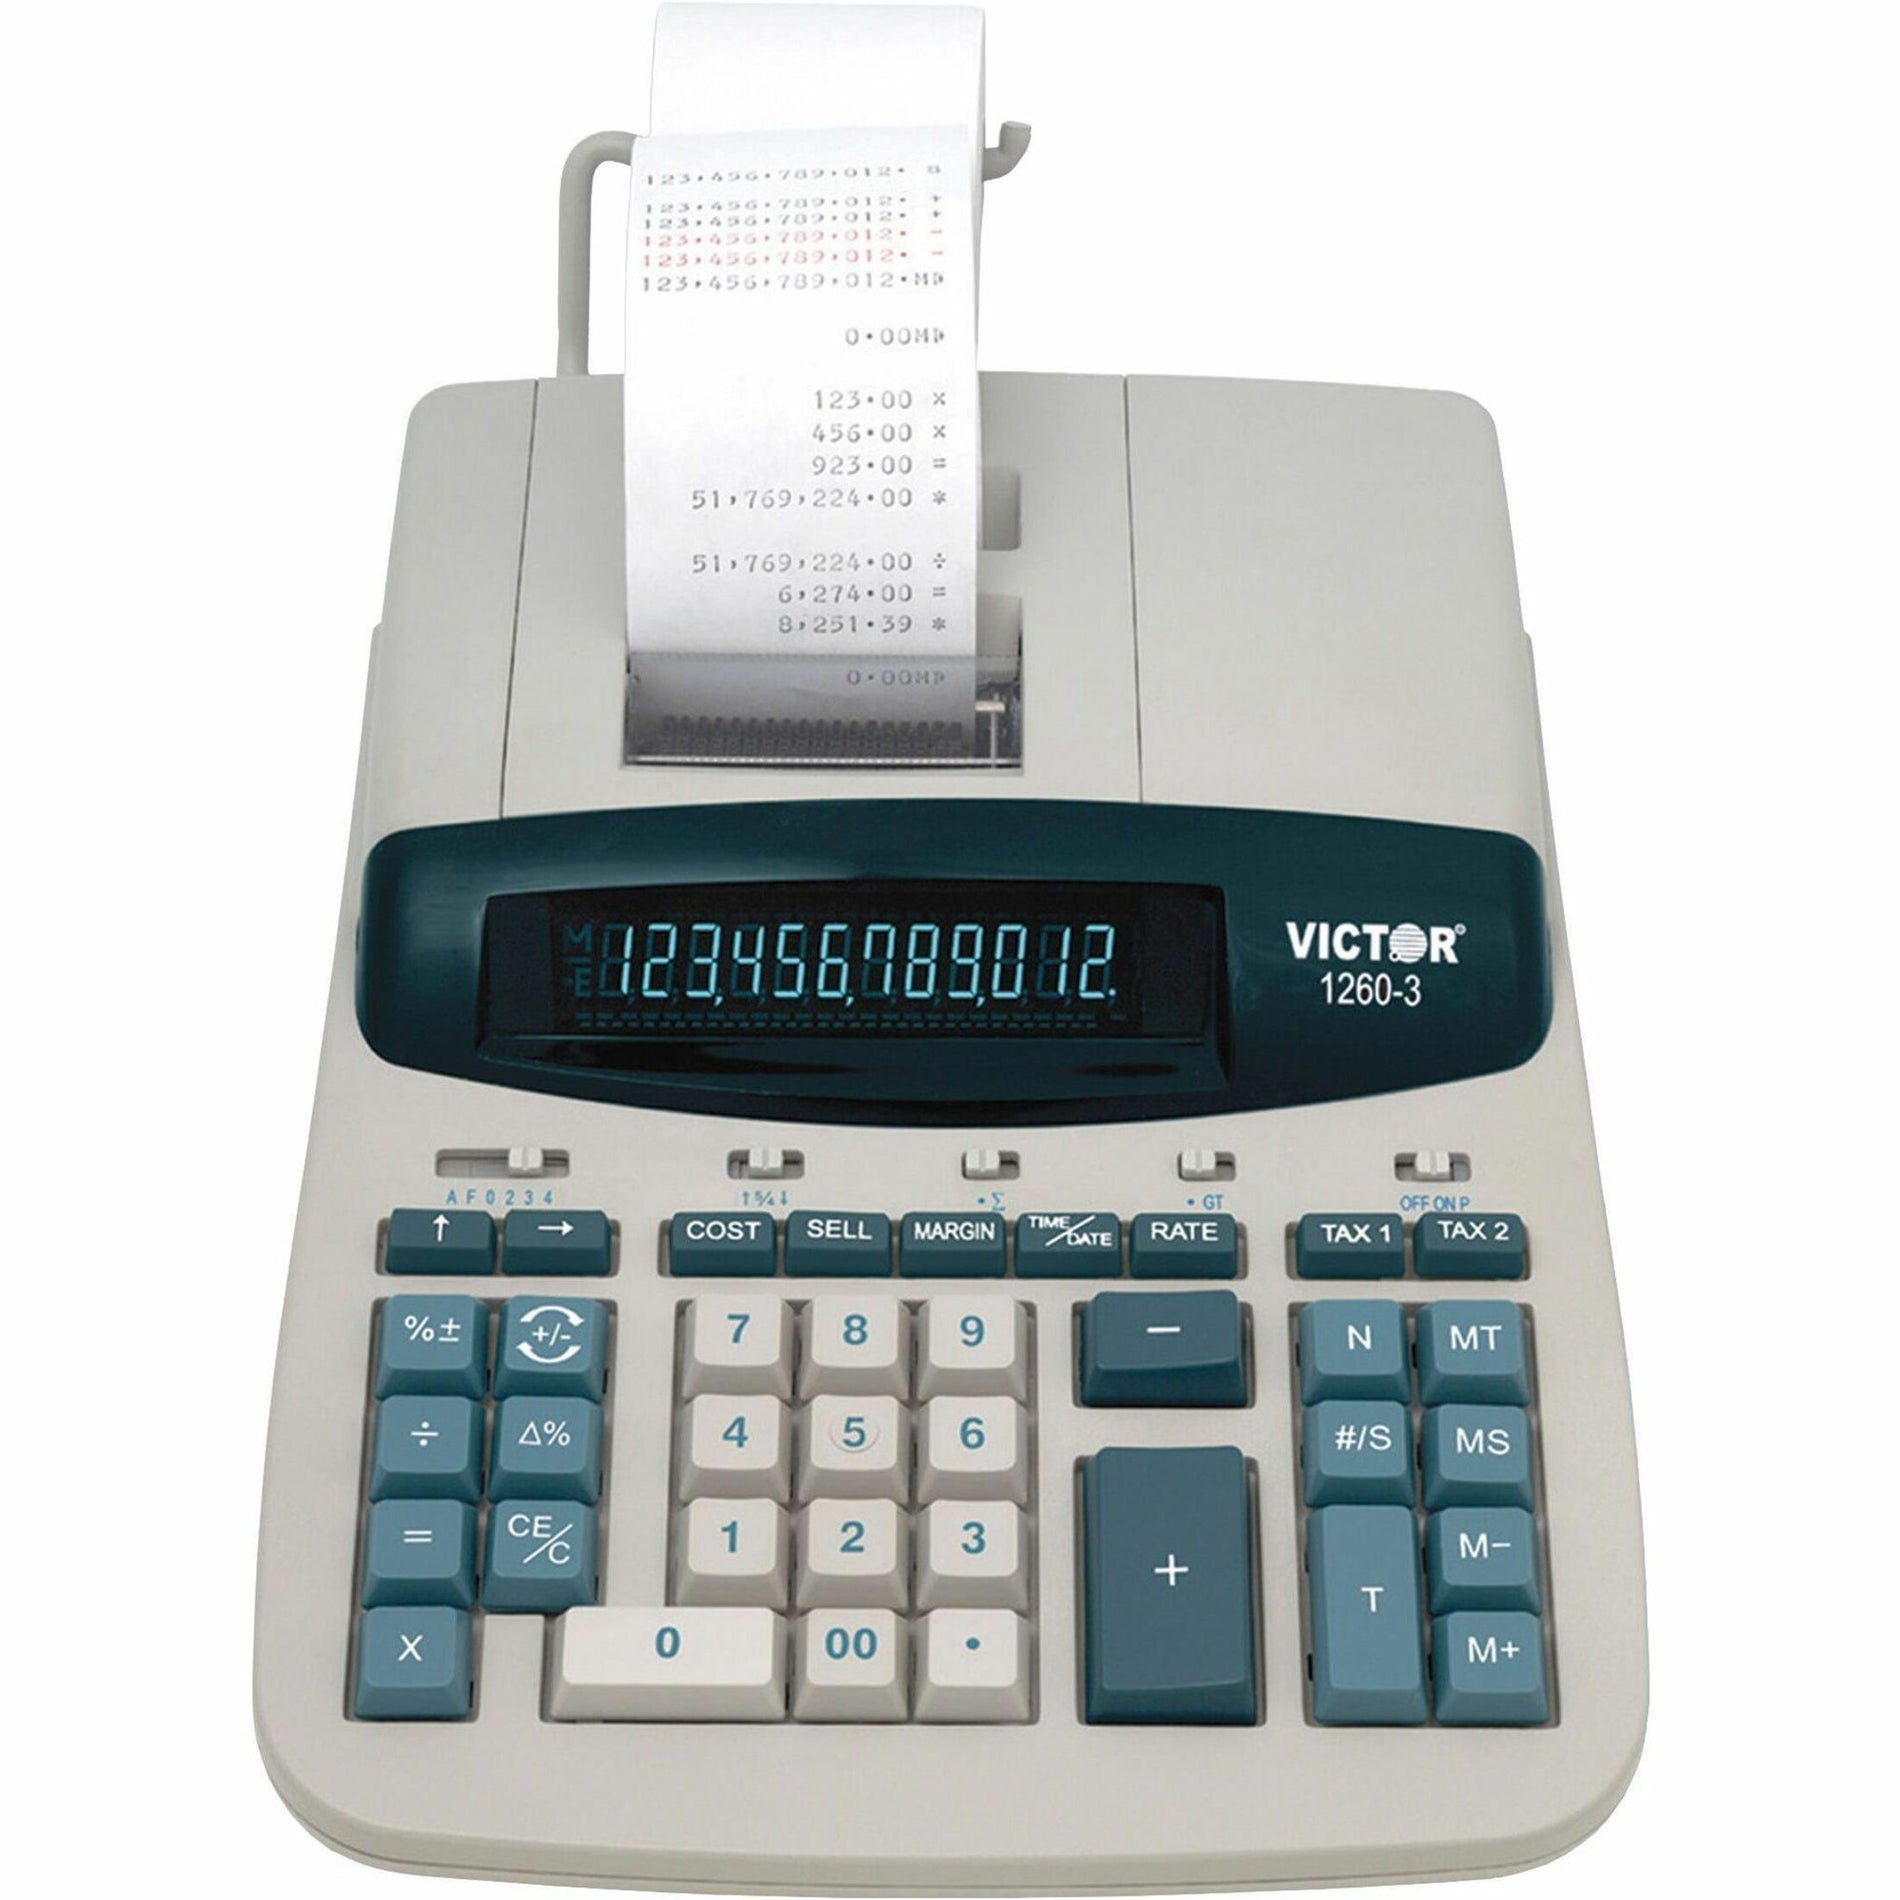 Victor 1260-3 Commercial Calculator, 12 Digit Heavy Duty Printing, AC Supply